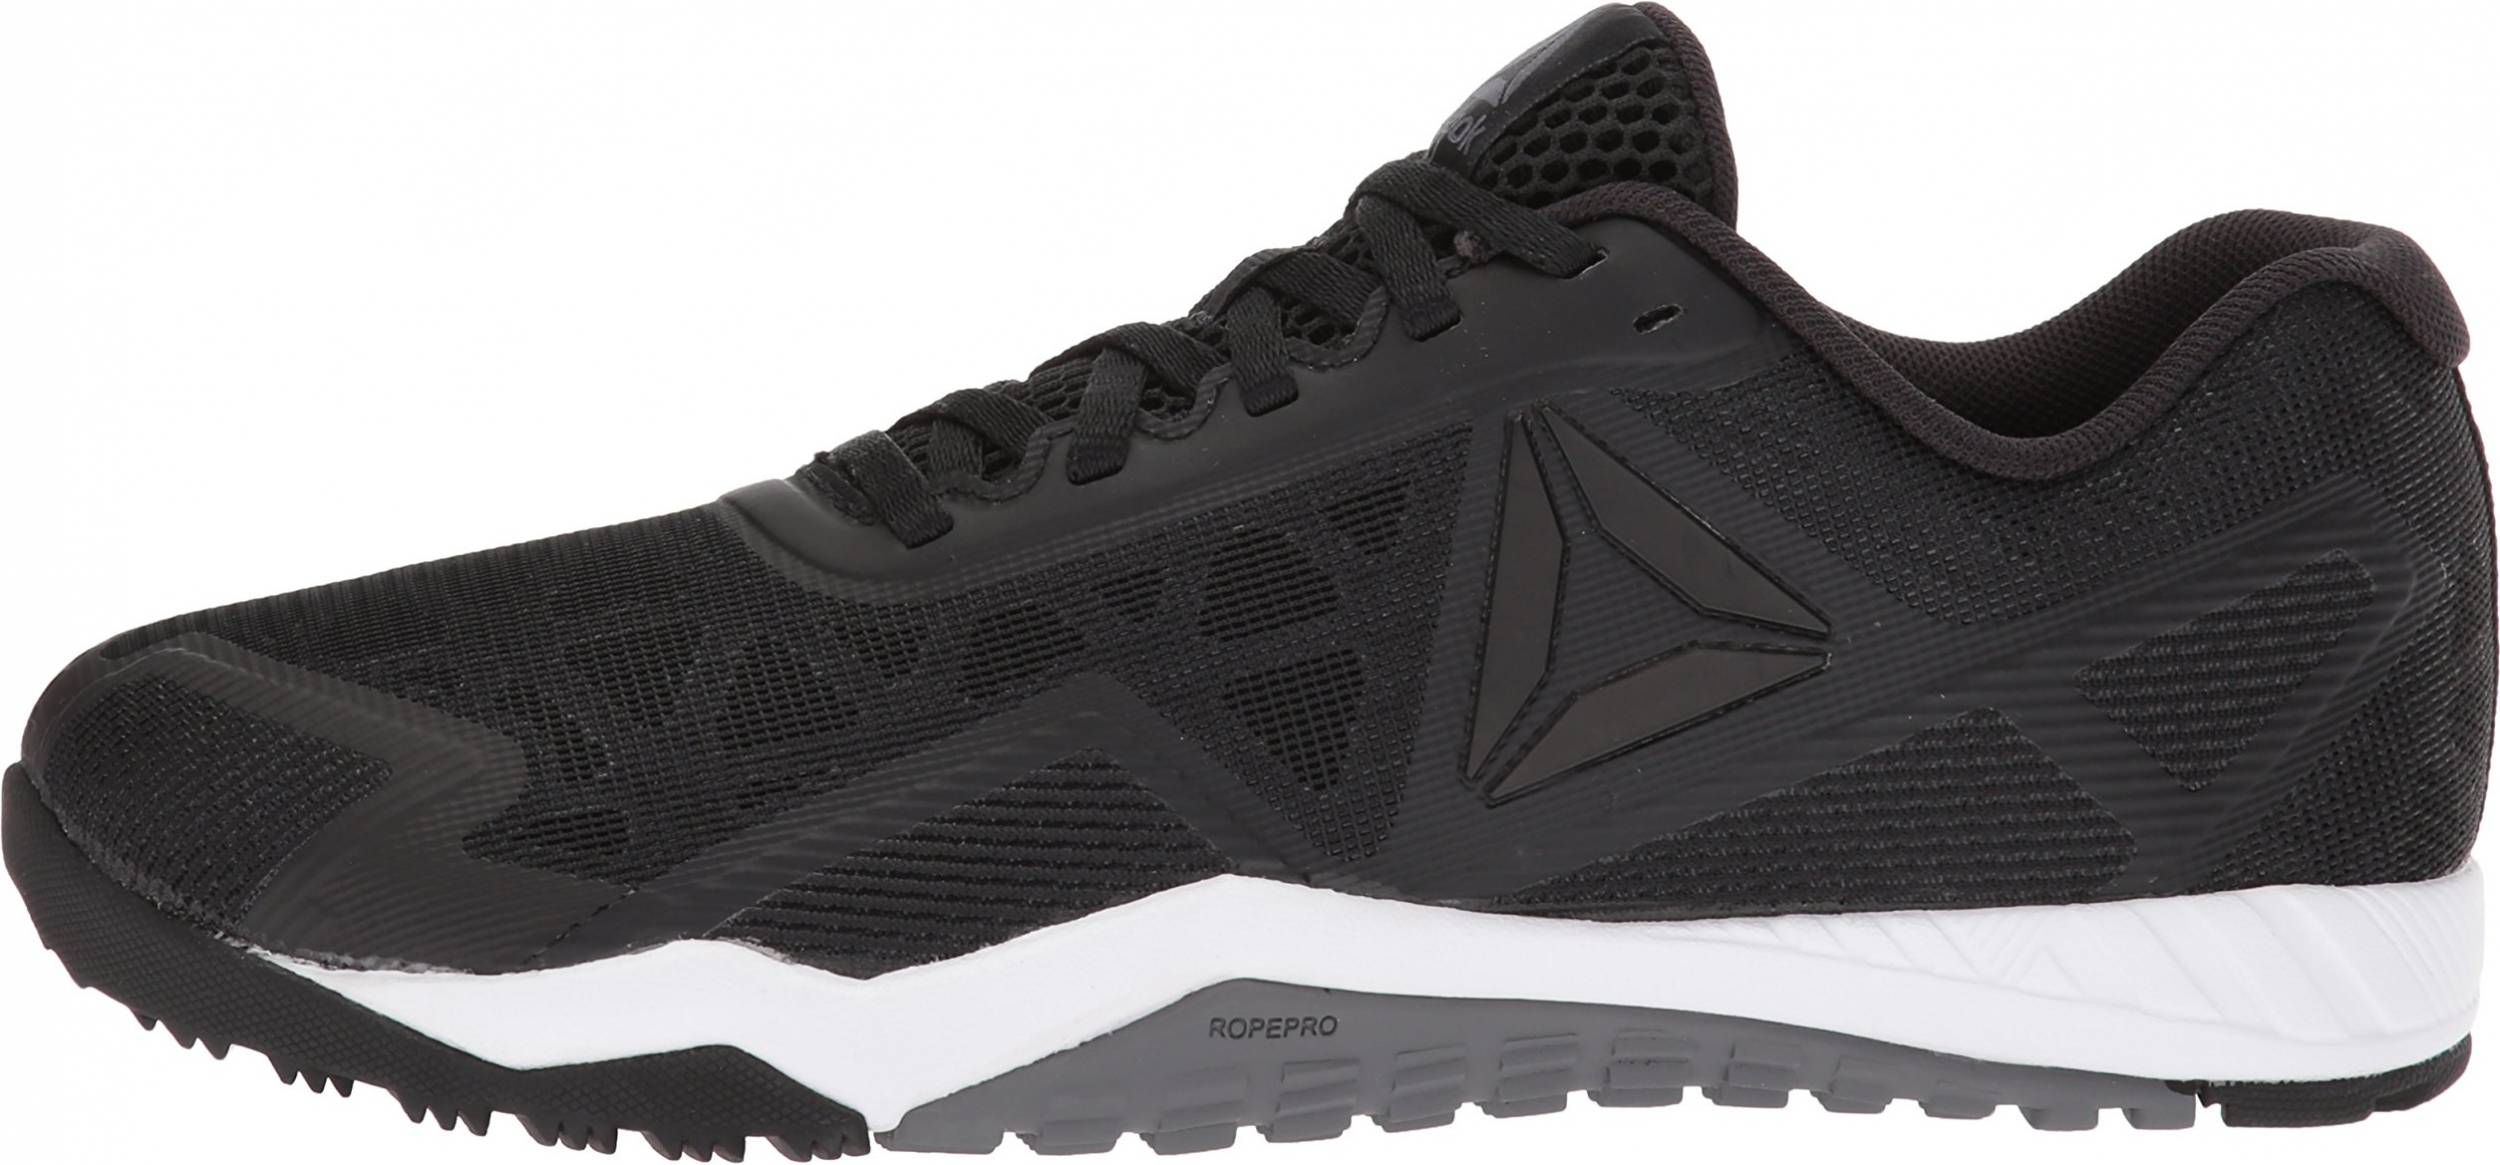 Sneaker Basses Homme Reebok Ros Workout Tr 2.0